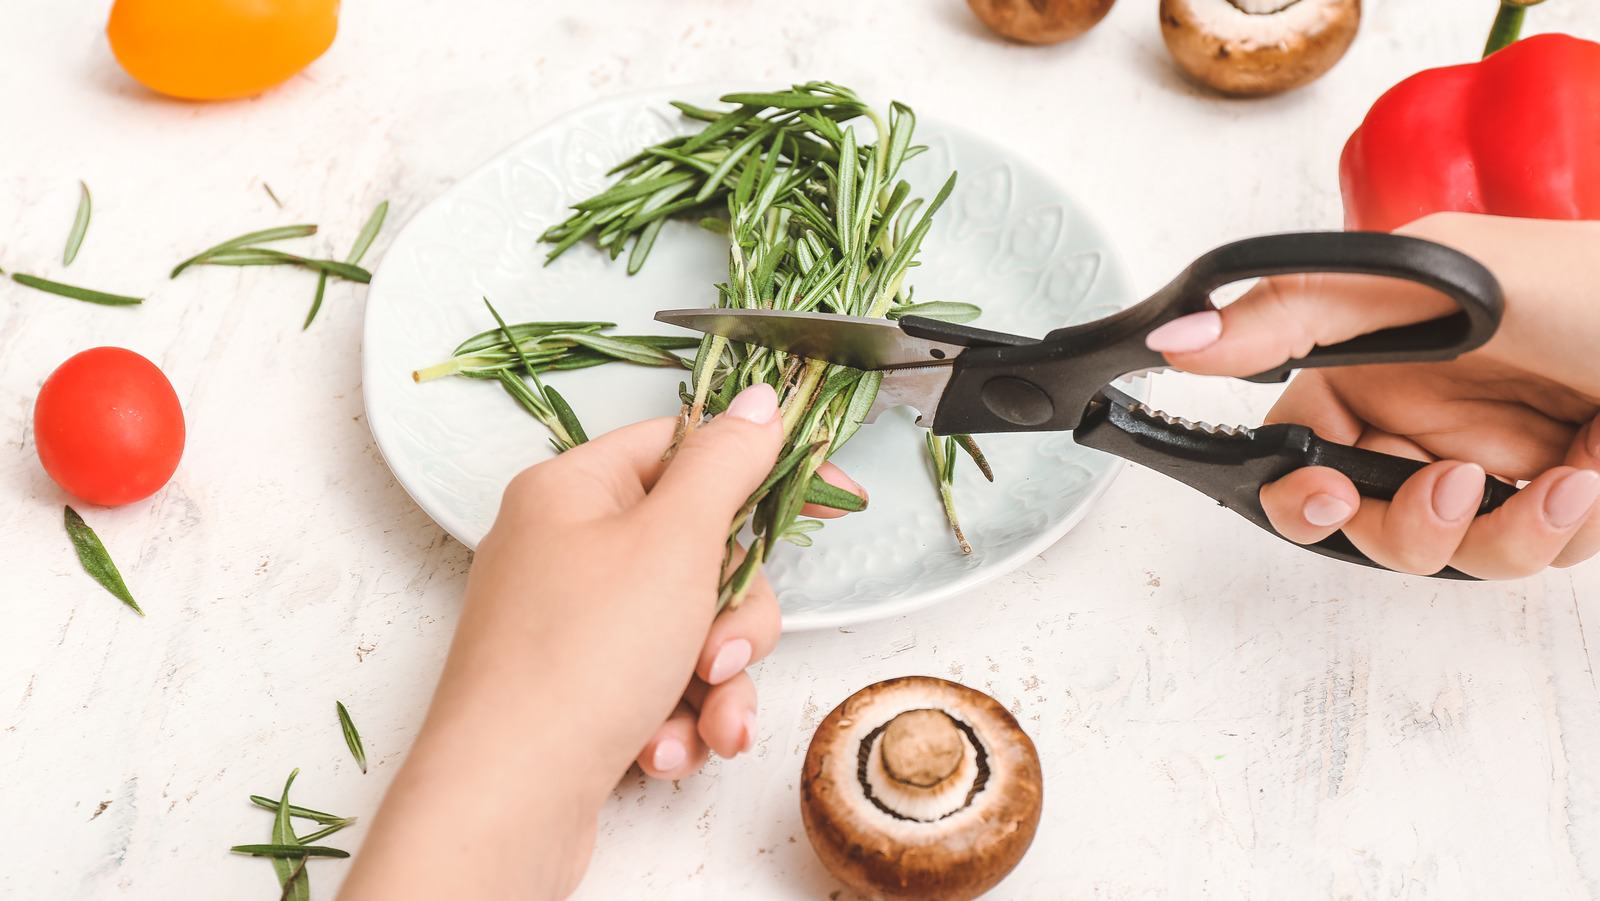 How To Use Aluminum Foil To Sharpen Your Kitchen Scissors